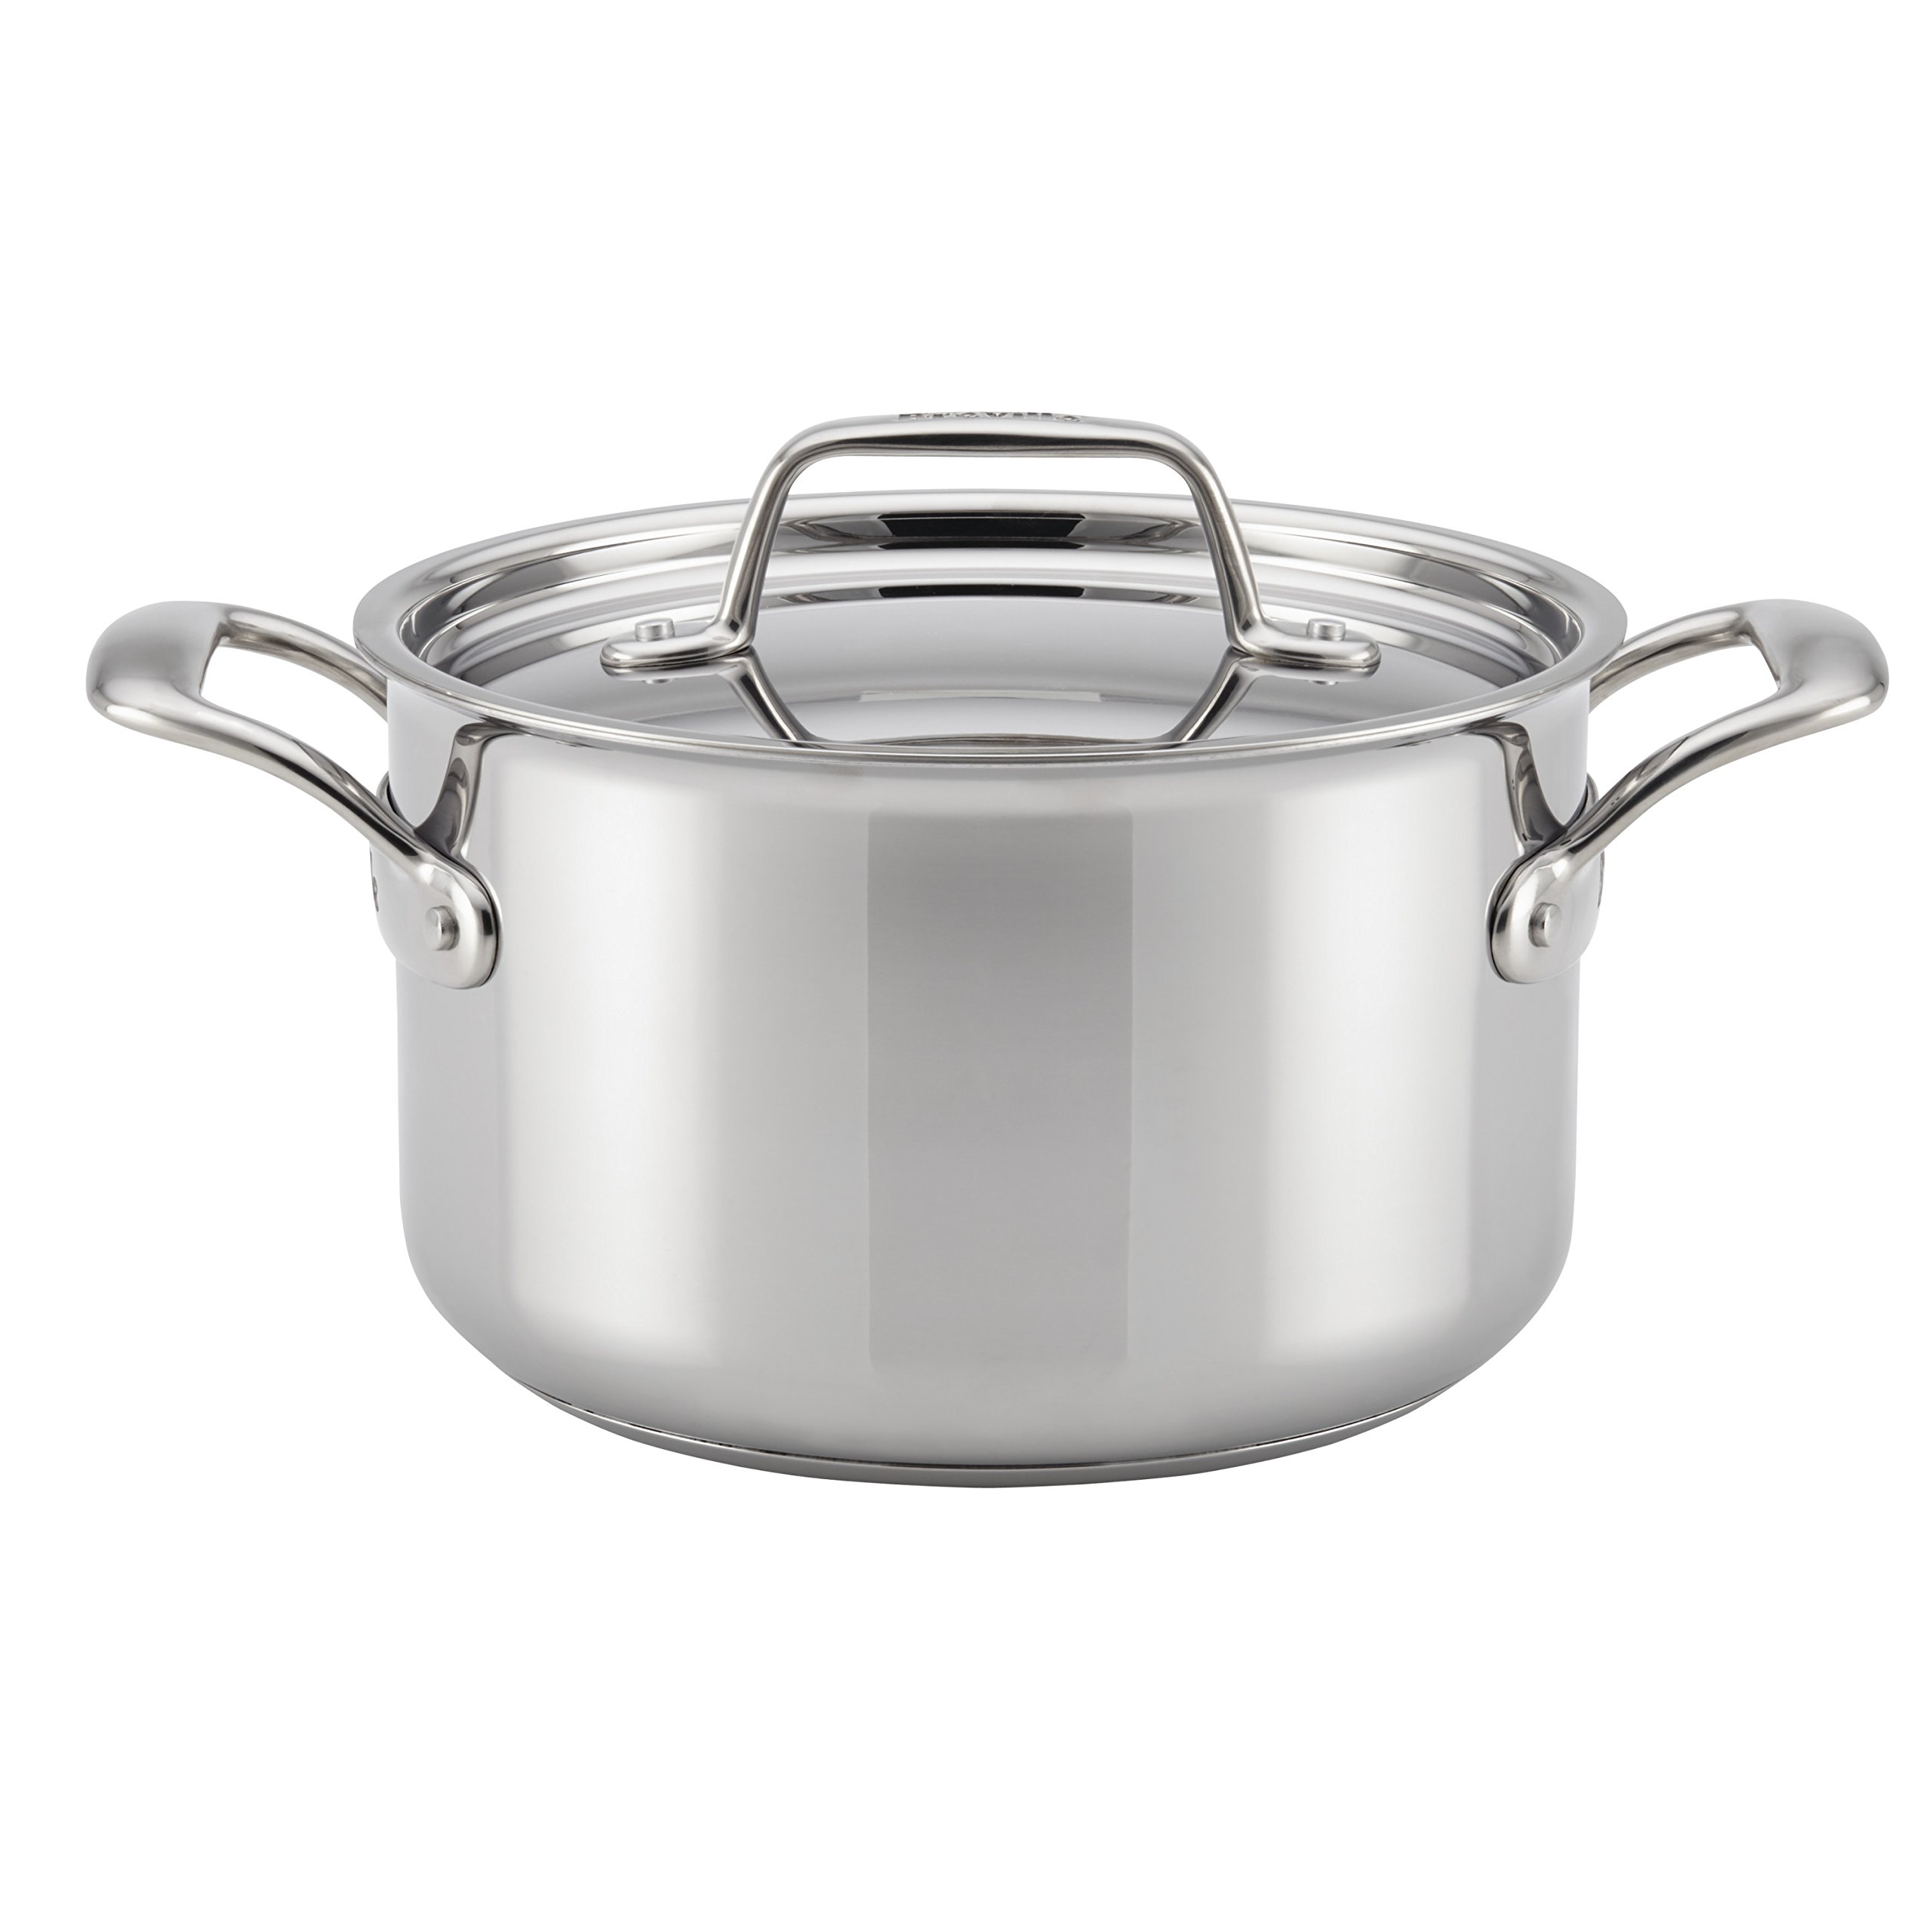 Breville Thermal Pro Clad Stainless Steel 4-Quart Covered Saucepot